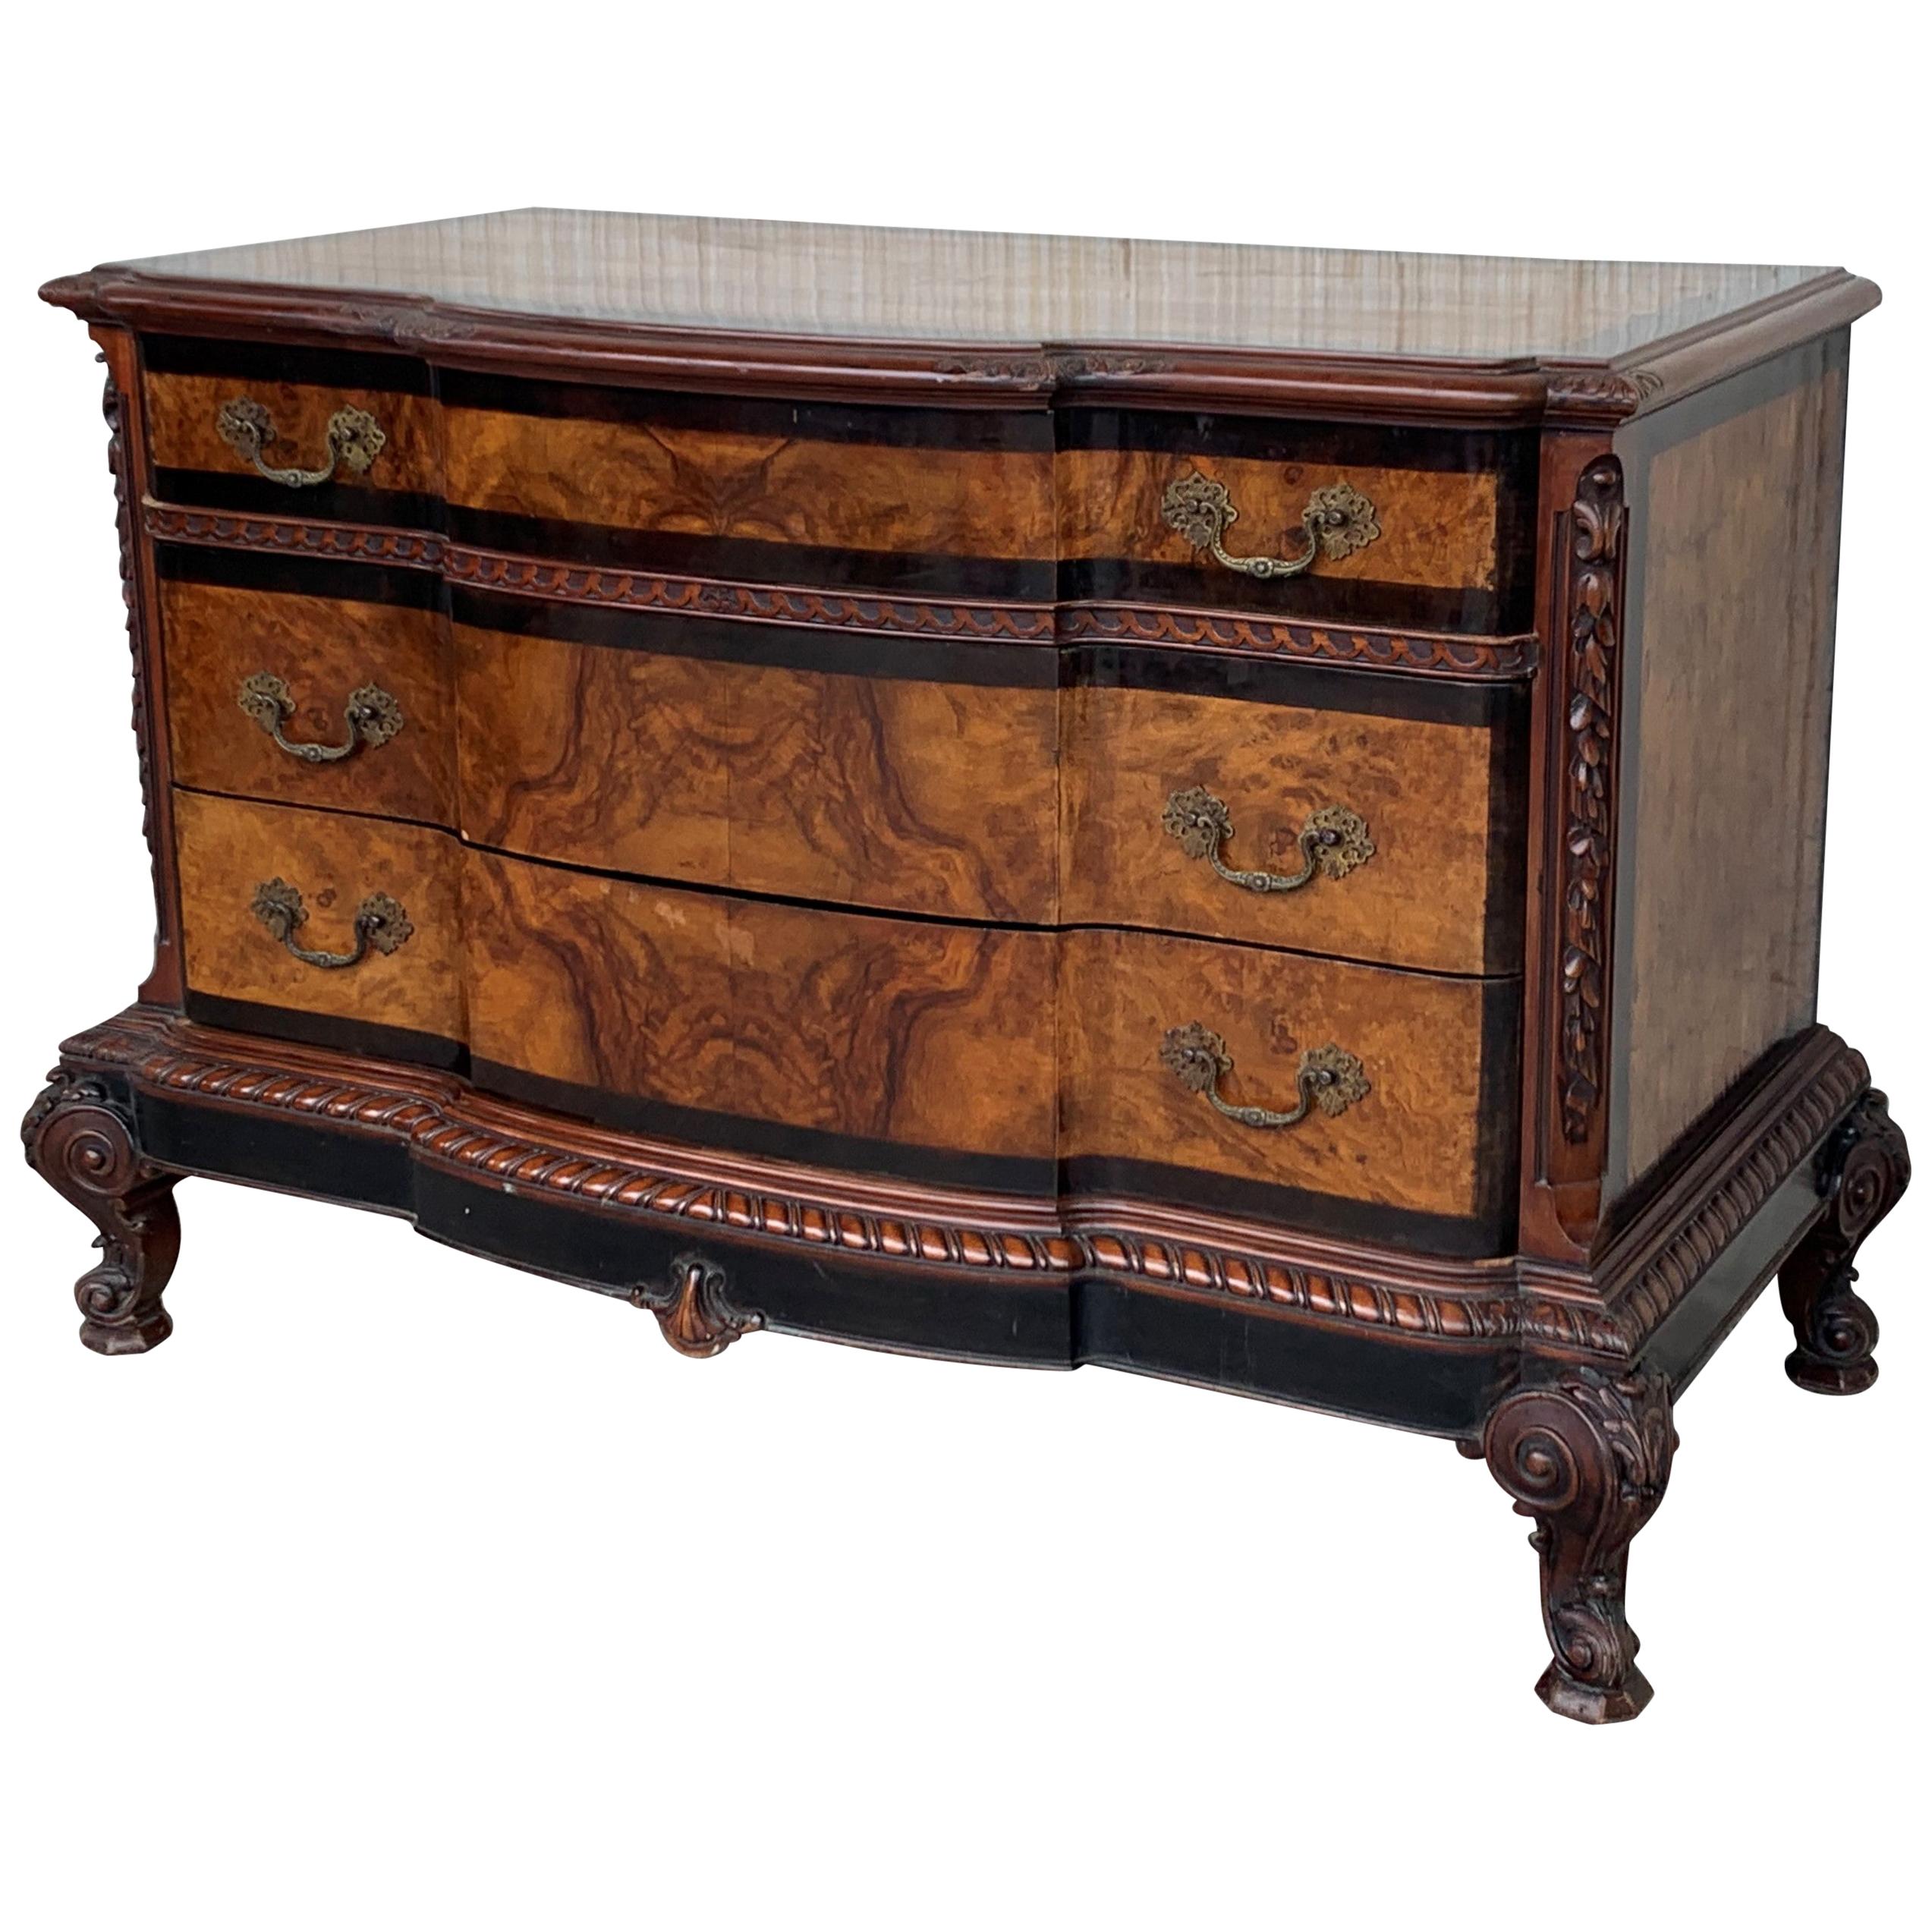 1900s Venetian Baroque Commode Chest of Drawers in Burl Walnut with Ebonized Det